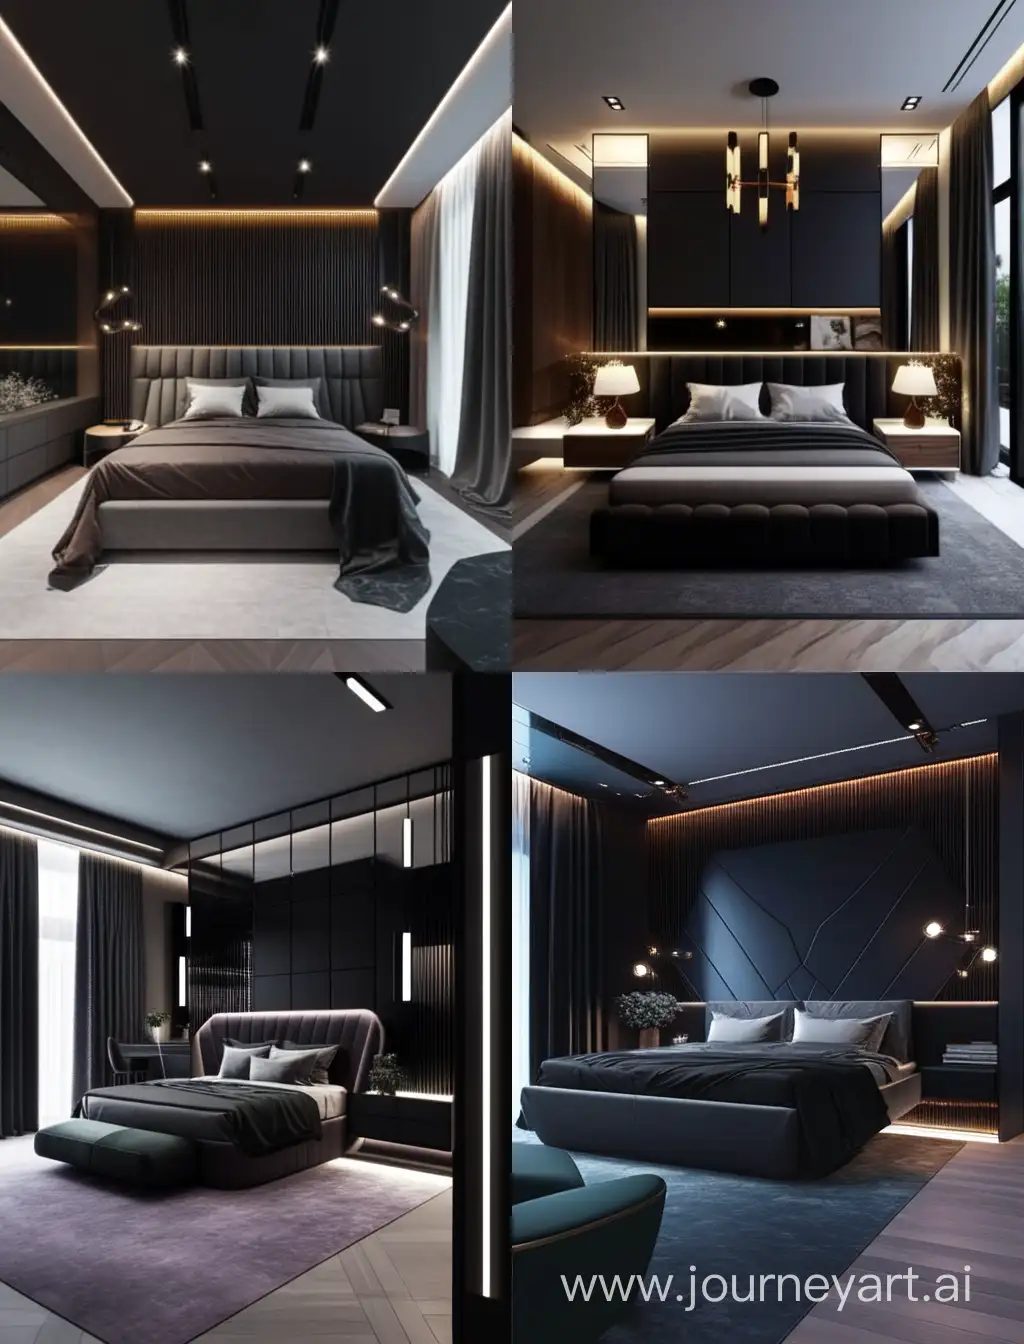 Luxurious-Master-Bedroom-Design-with-Dark-Tones-Geometry-Backlighting-and-Floating-Consoles